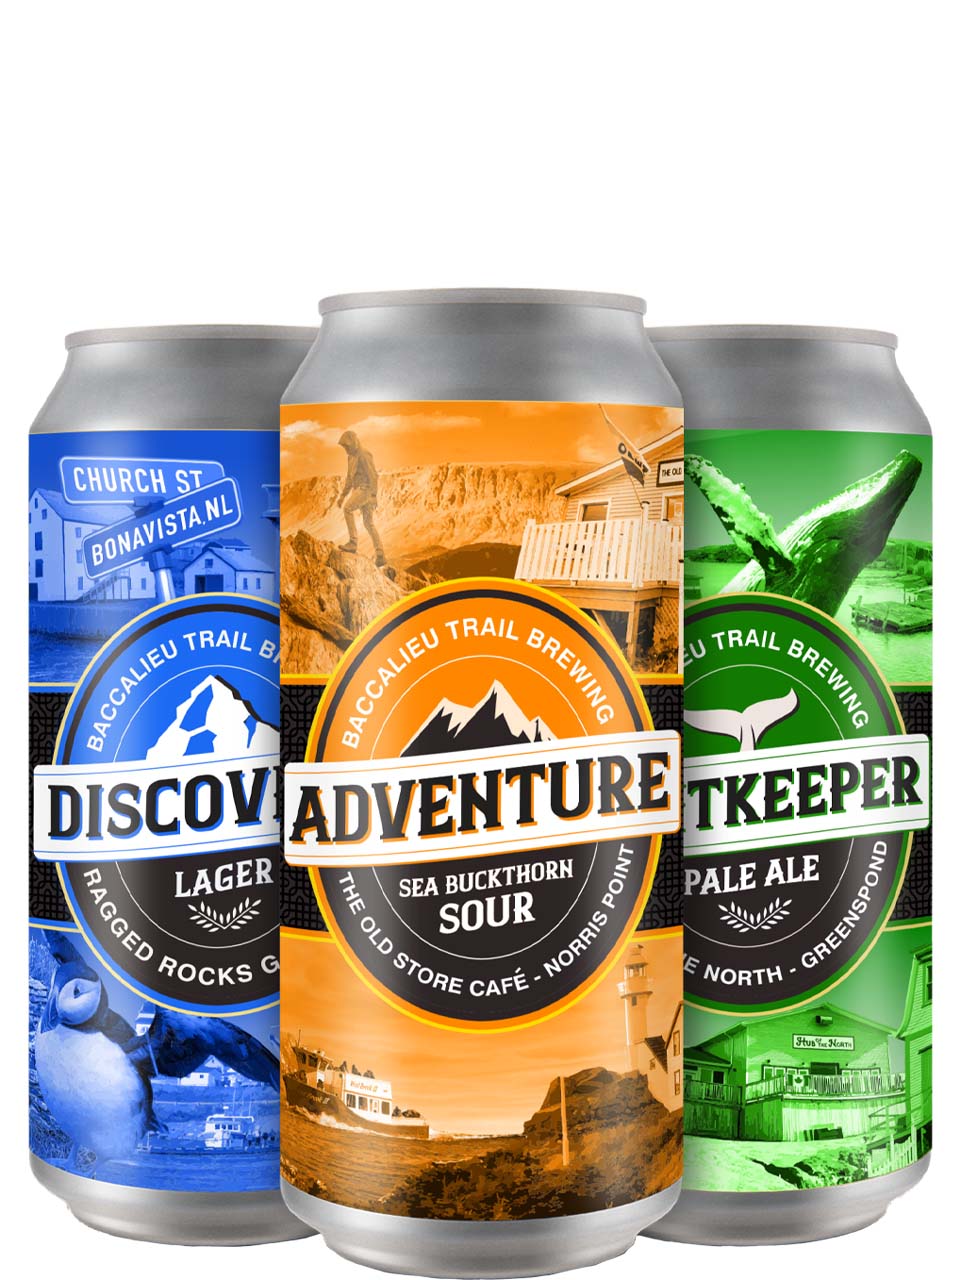 Baccalieu Trail Grab 4 and Explore 4 Pack Cans